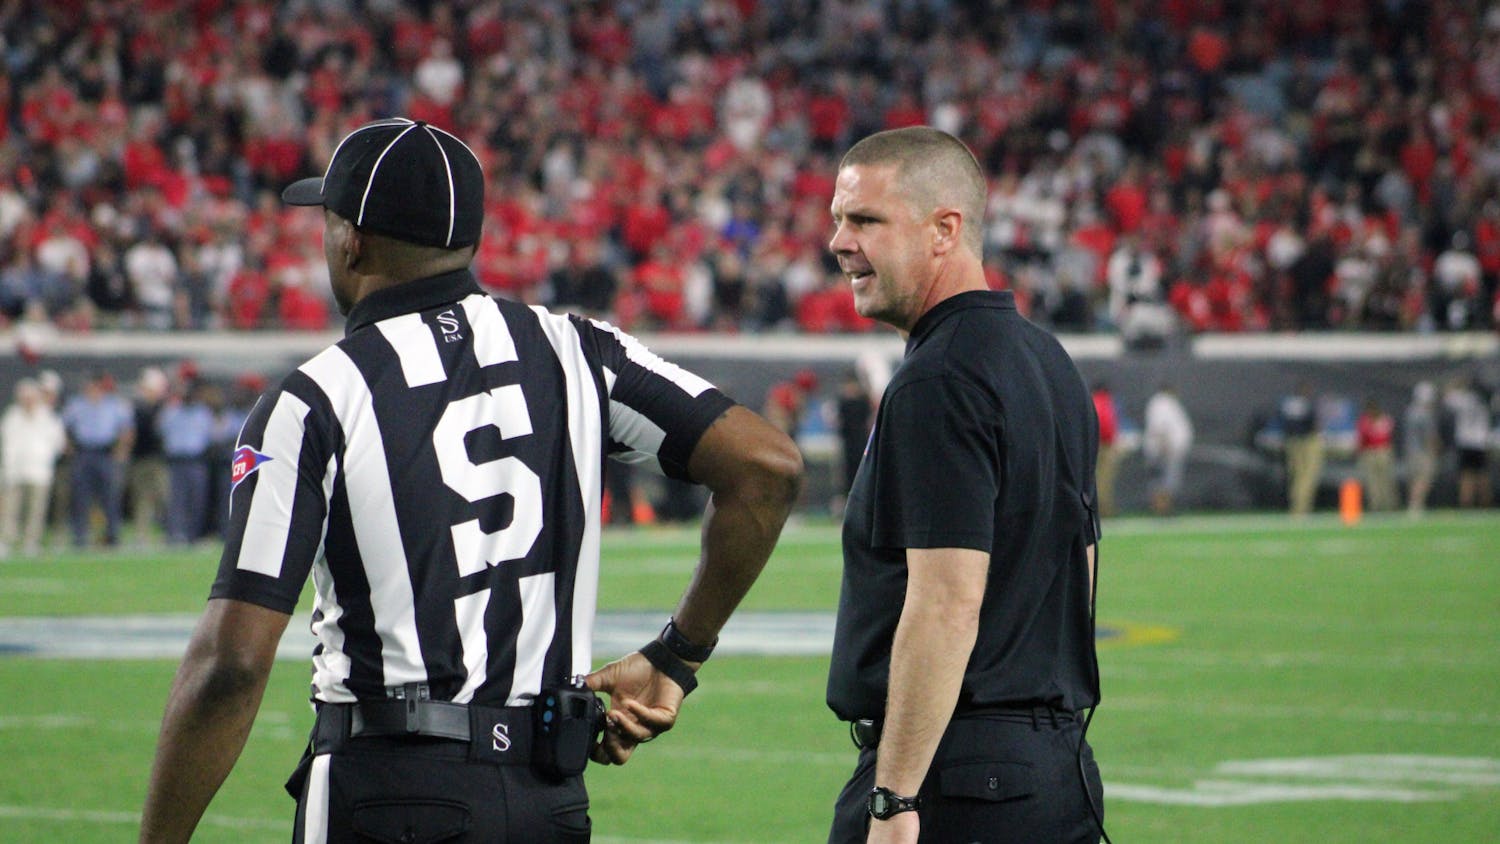 Florida head coach Billy Napier argues with an official during the Gators’ loss to Georgia Saturday, Oct. 29, 2022.